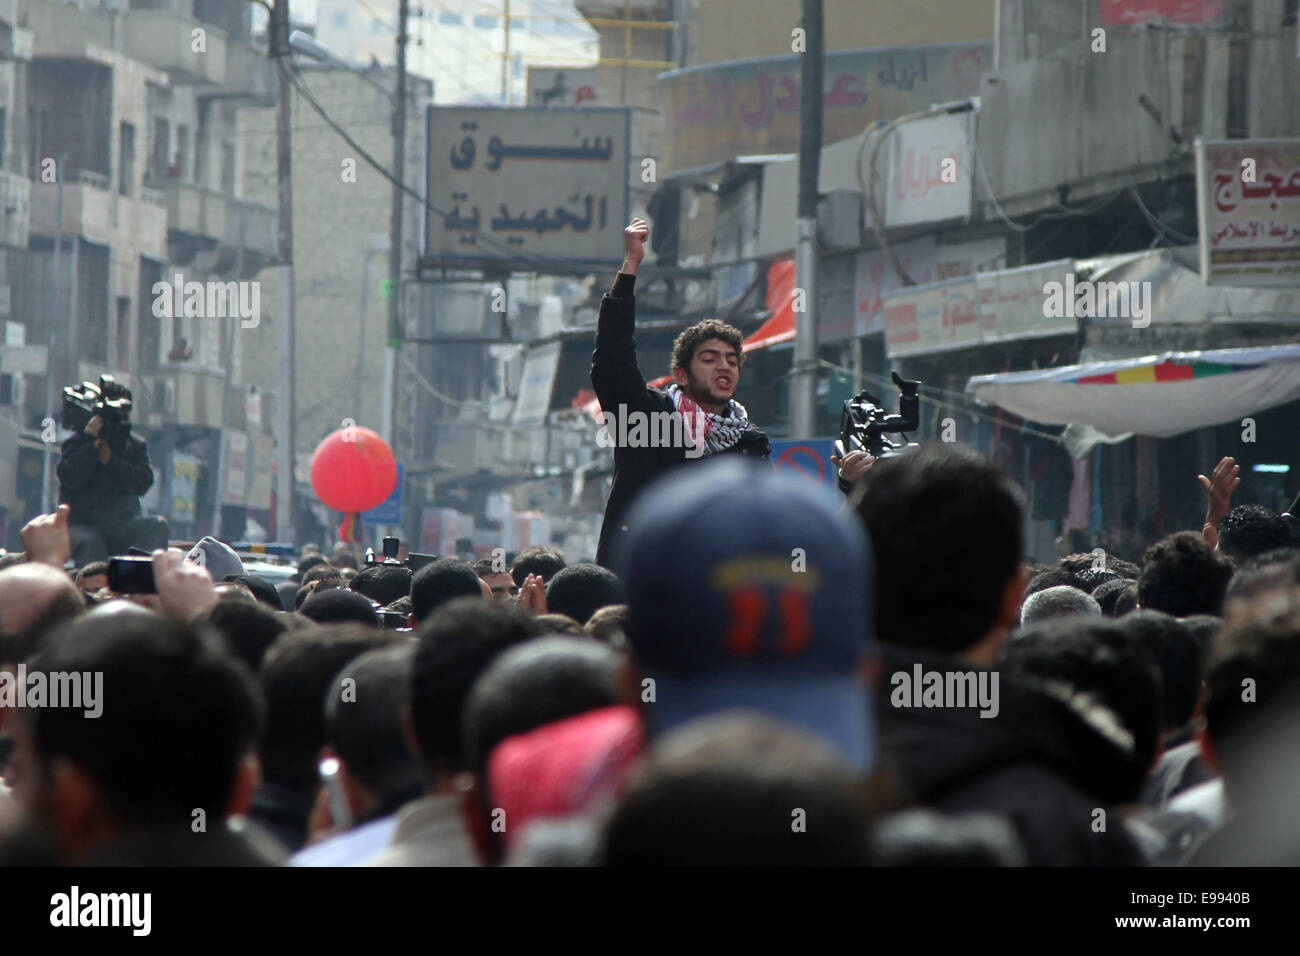 Protests in central Amman, Jordan after Friday prayers on 11 February 2011 Stock Photo